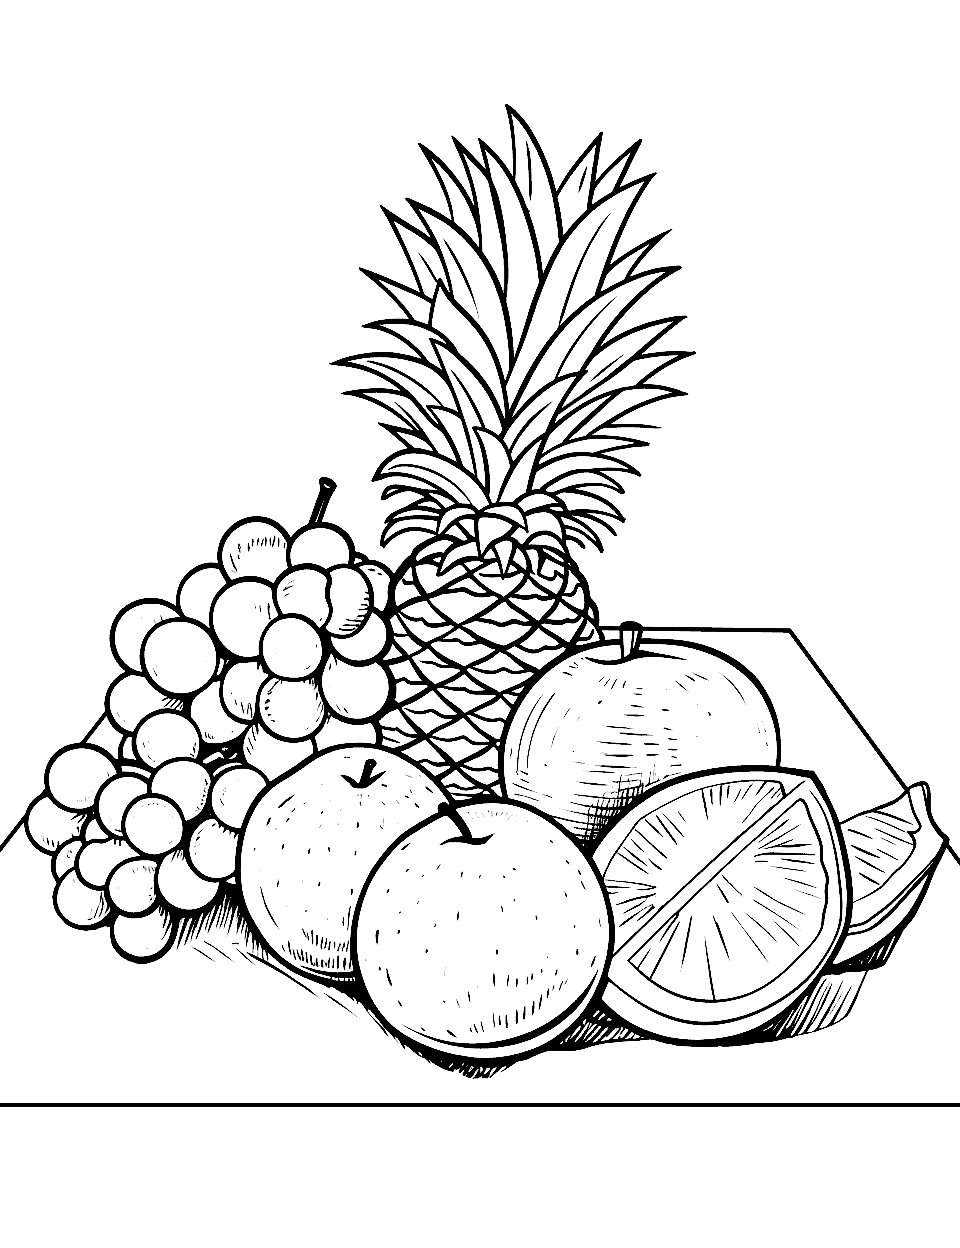 Peachy Picnic Fruit Coloring Page - A picnic blanket with a bunch of fruits laid out, including a peach.